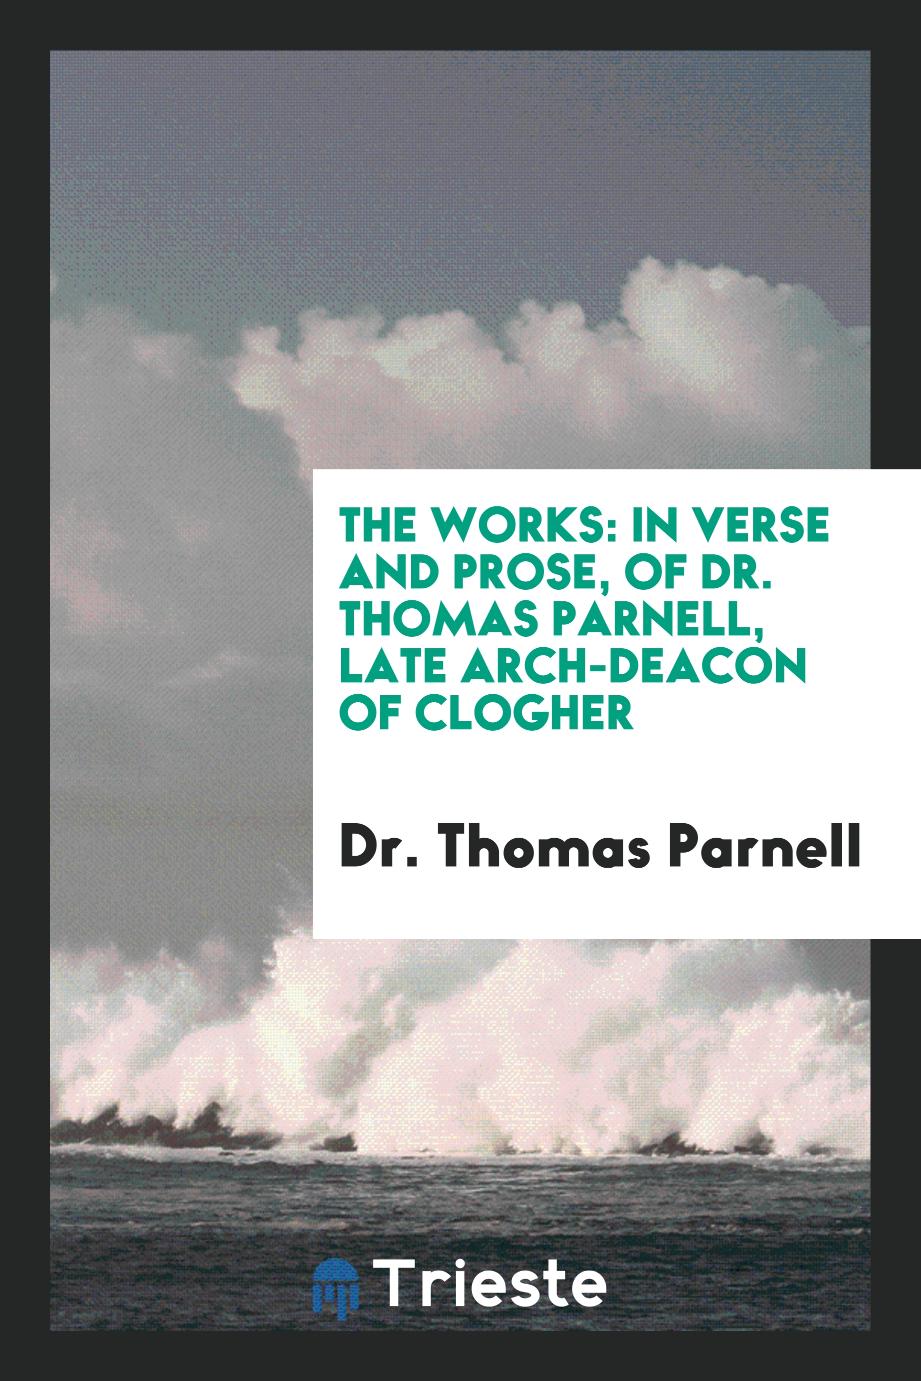 The Works: In Verse and Prose, of Dr. Thomas Parnell, Late Arch-Deacon of Clogher